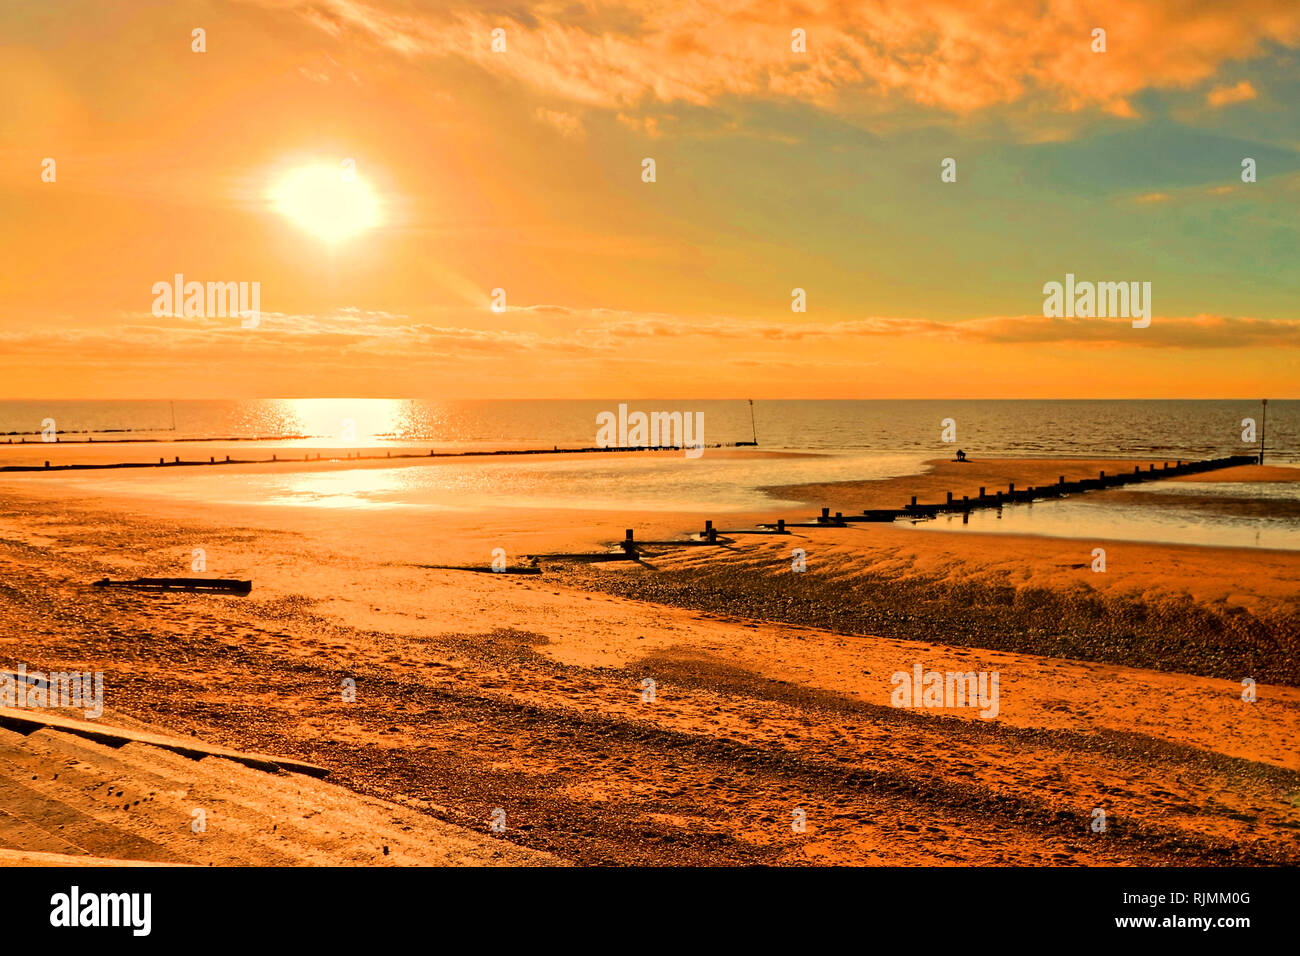 A glorious sunset at Hunstanton, Norfolk, England, UK. Hunstanton is the only resort in East Anglia facing west so the sun sets over the sea. Stock Photo